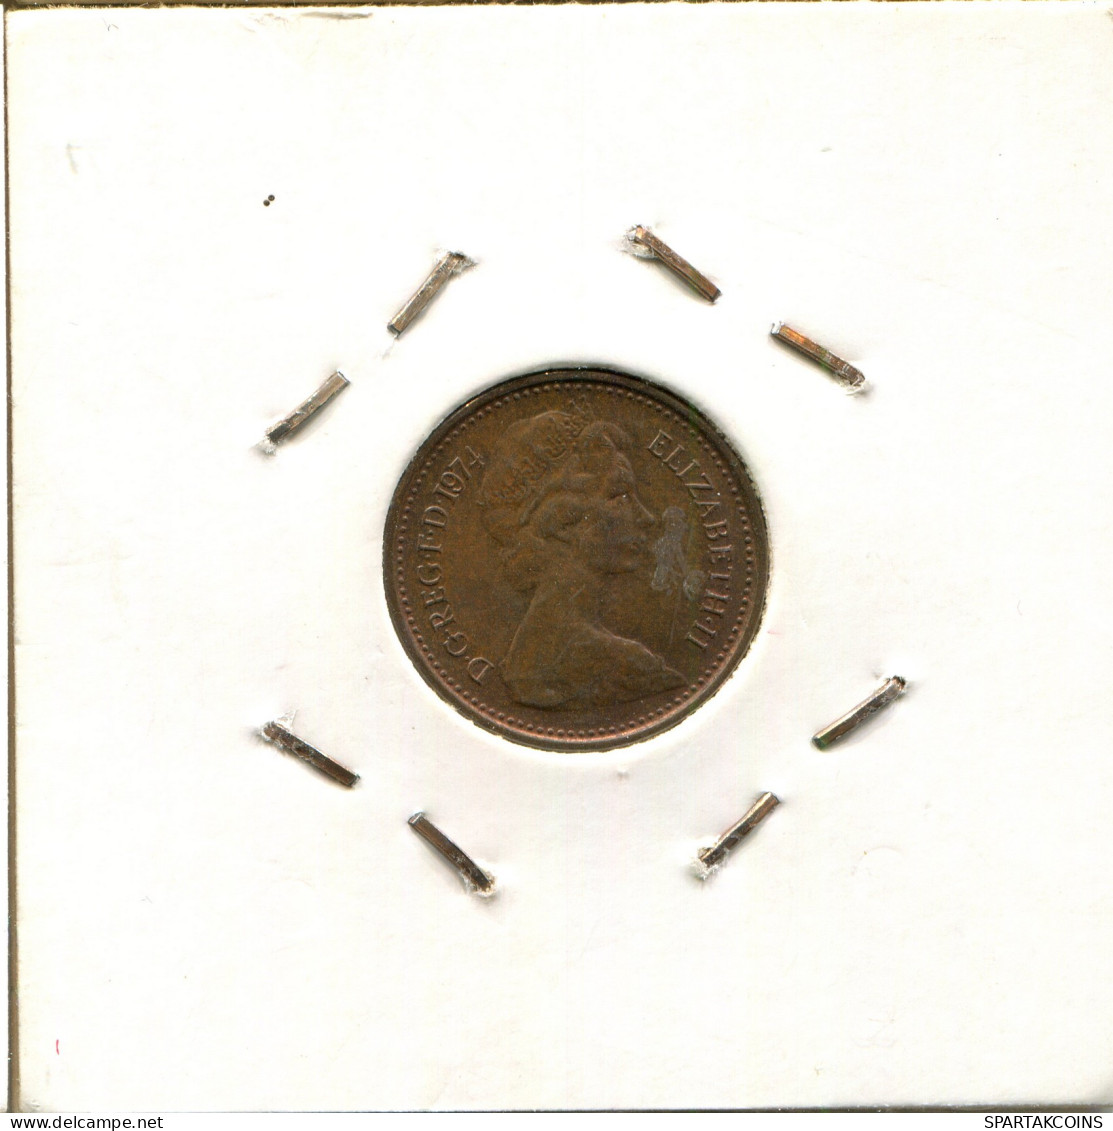 HALF PENNY 1974 UK GREAT BRITAIN Coin #AW167.U - 1/2 Penny & 1/2 New Penny